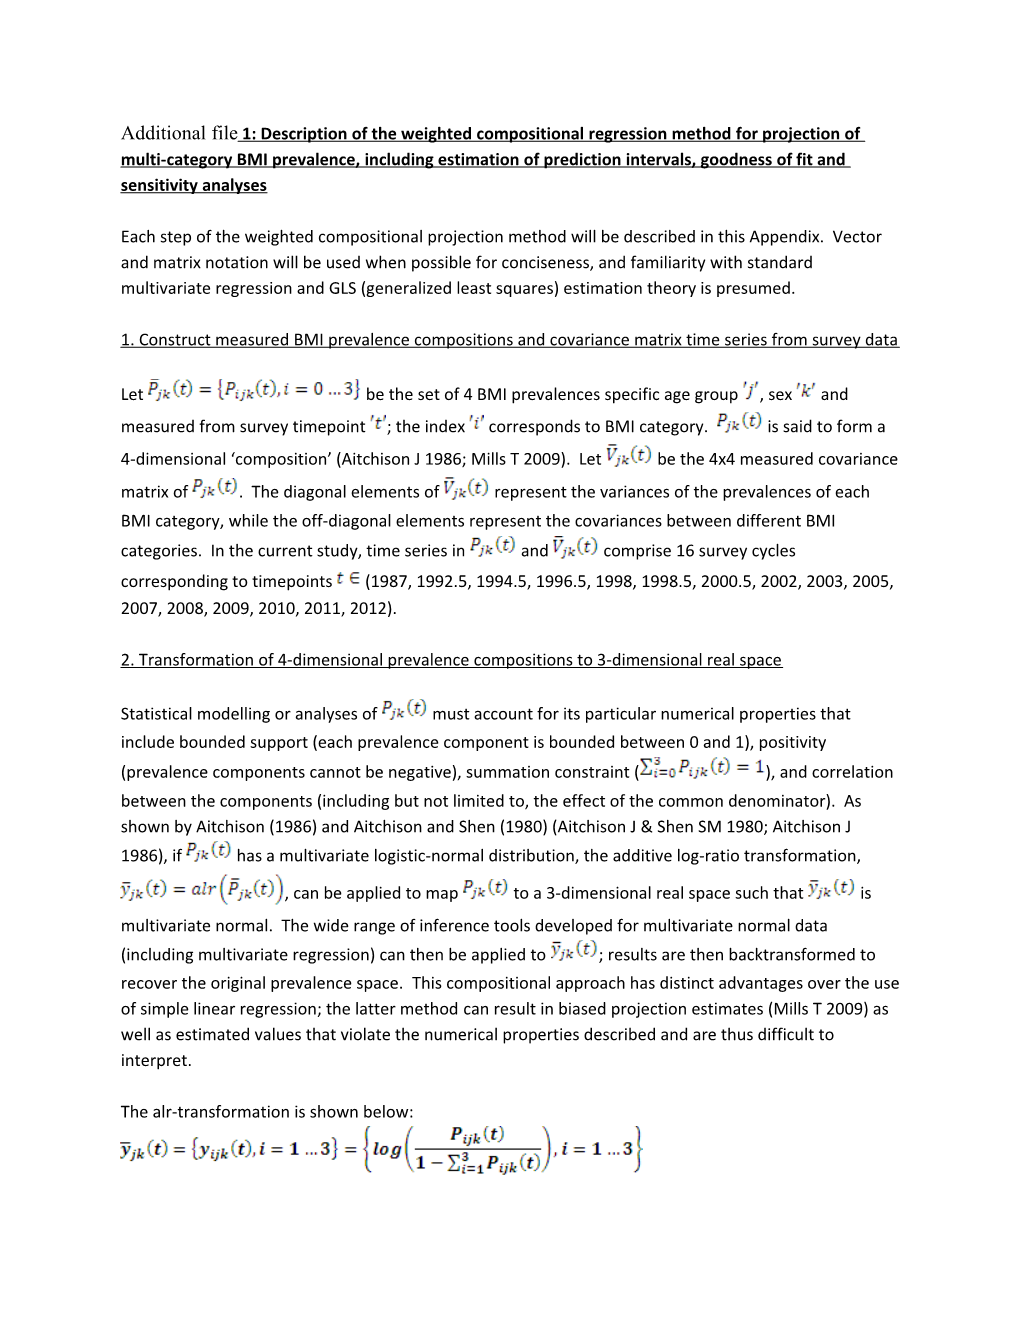 Additional File 1: Description of the Weighted Compositional Regression Method for Projection